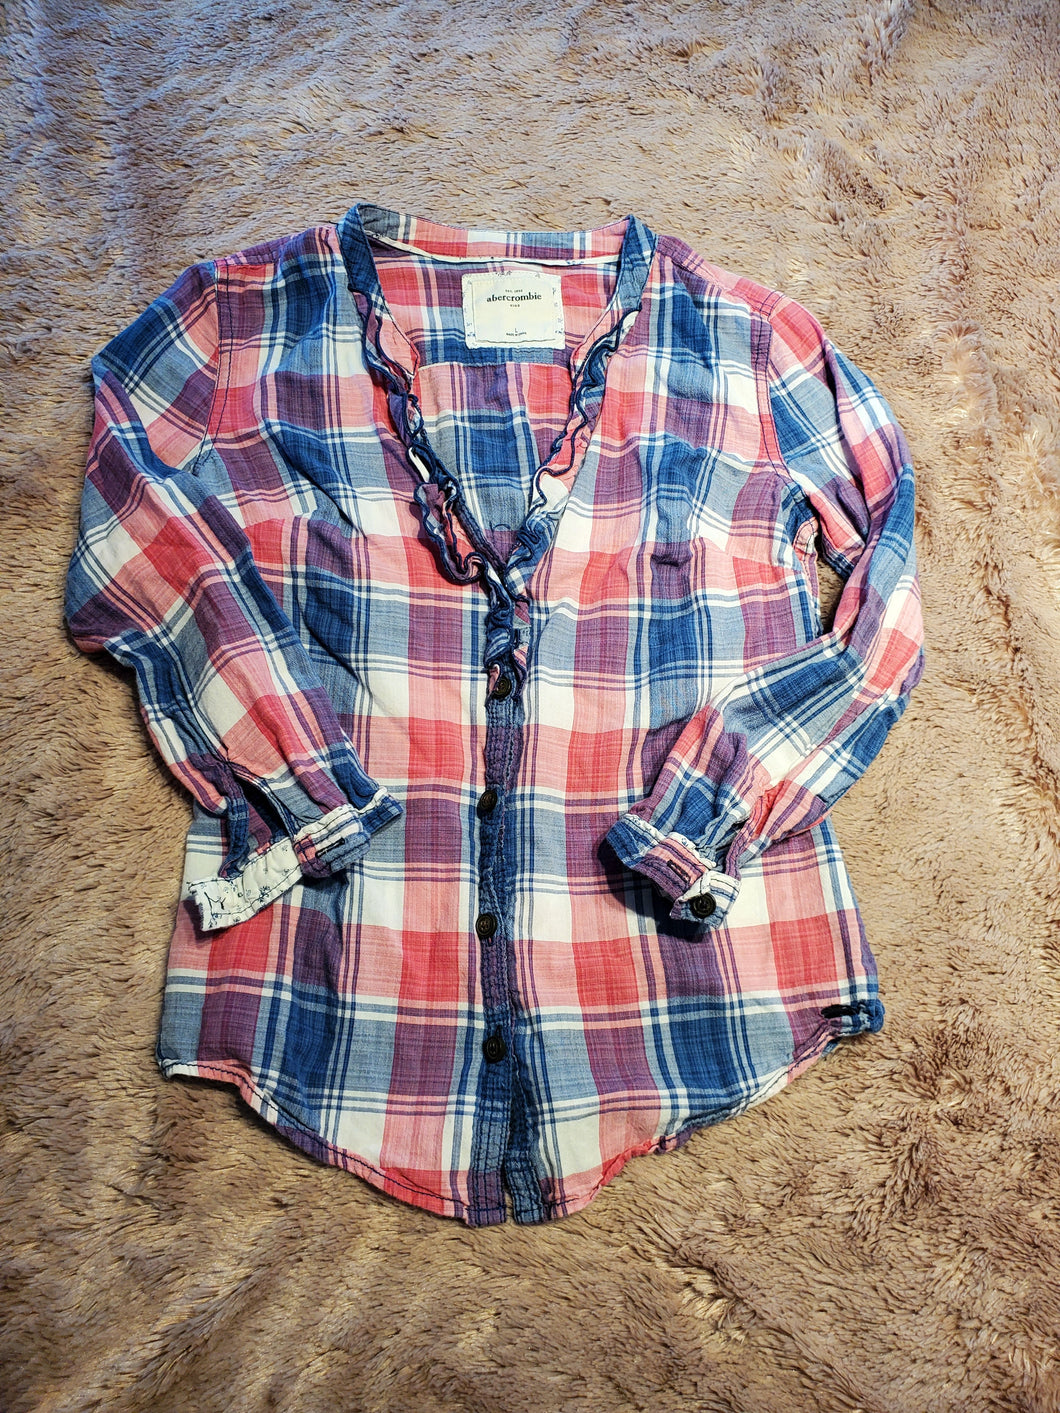 Abercrombie Kids plaid button up shirt pink and blue size large Large